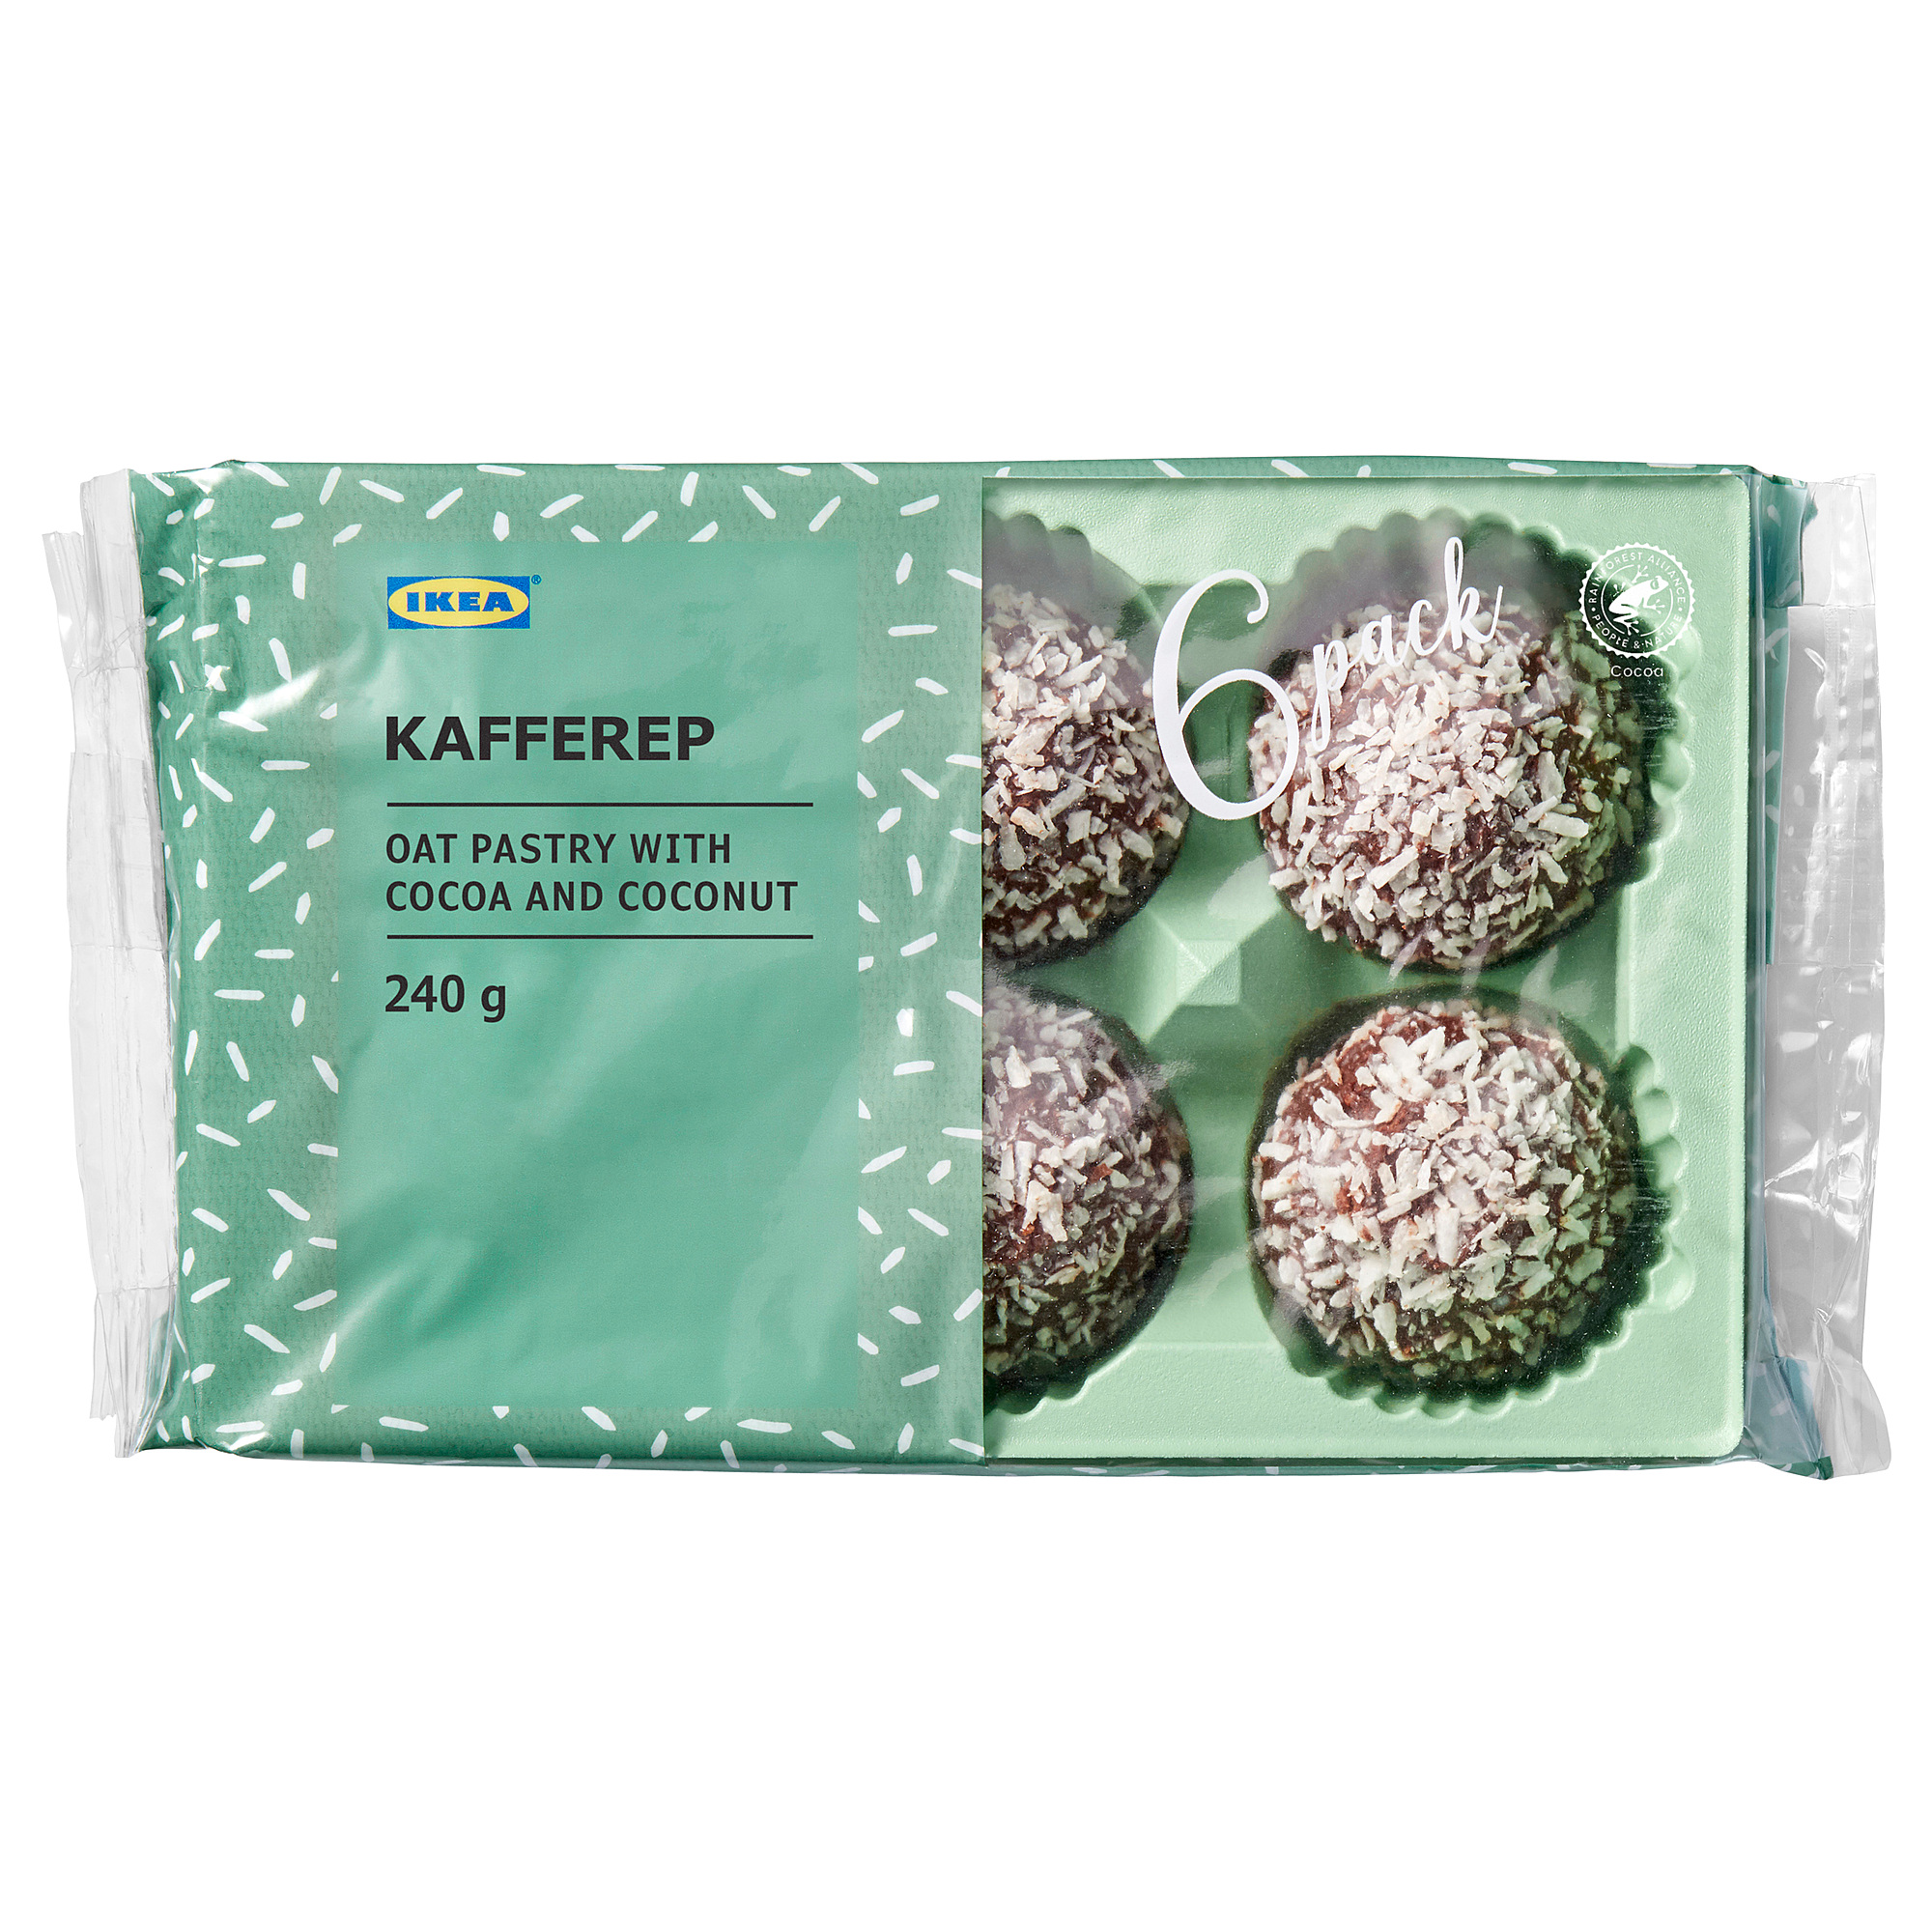 KAFFEREP oat pastry with cocoa and coconut